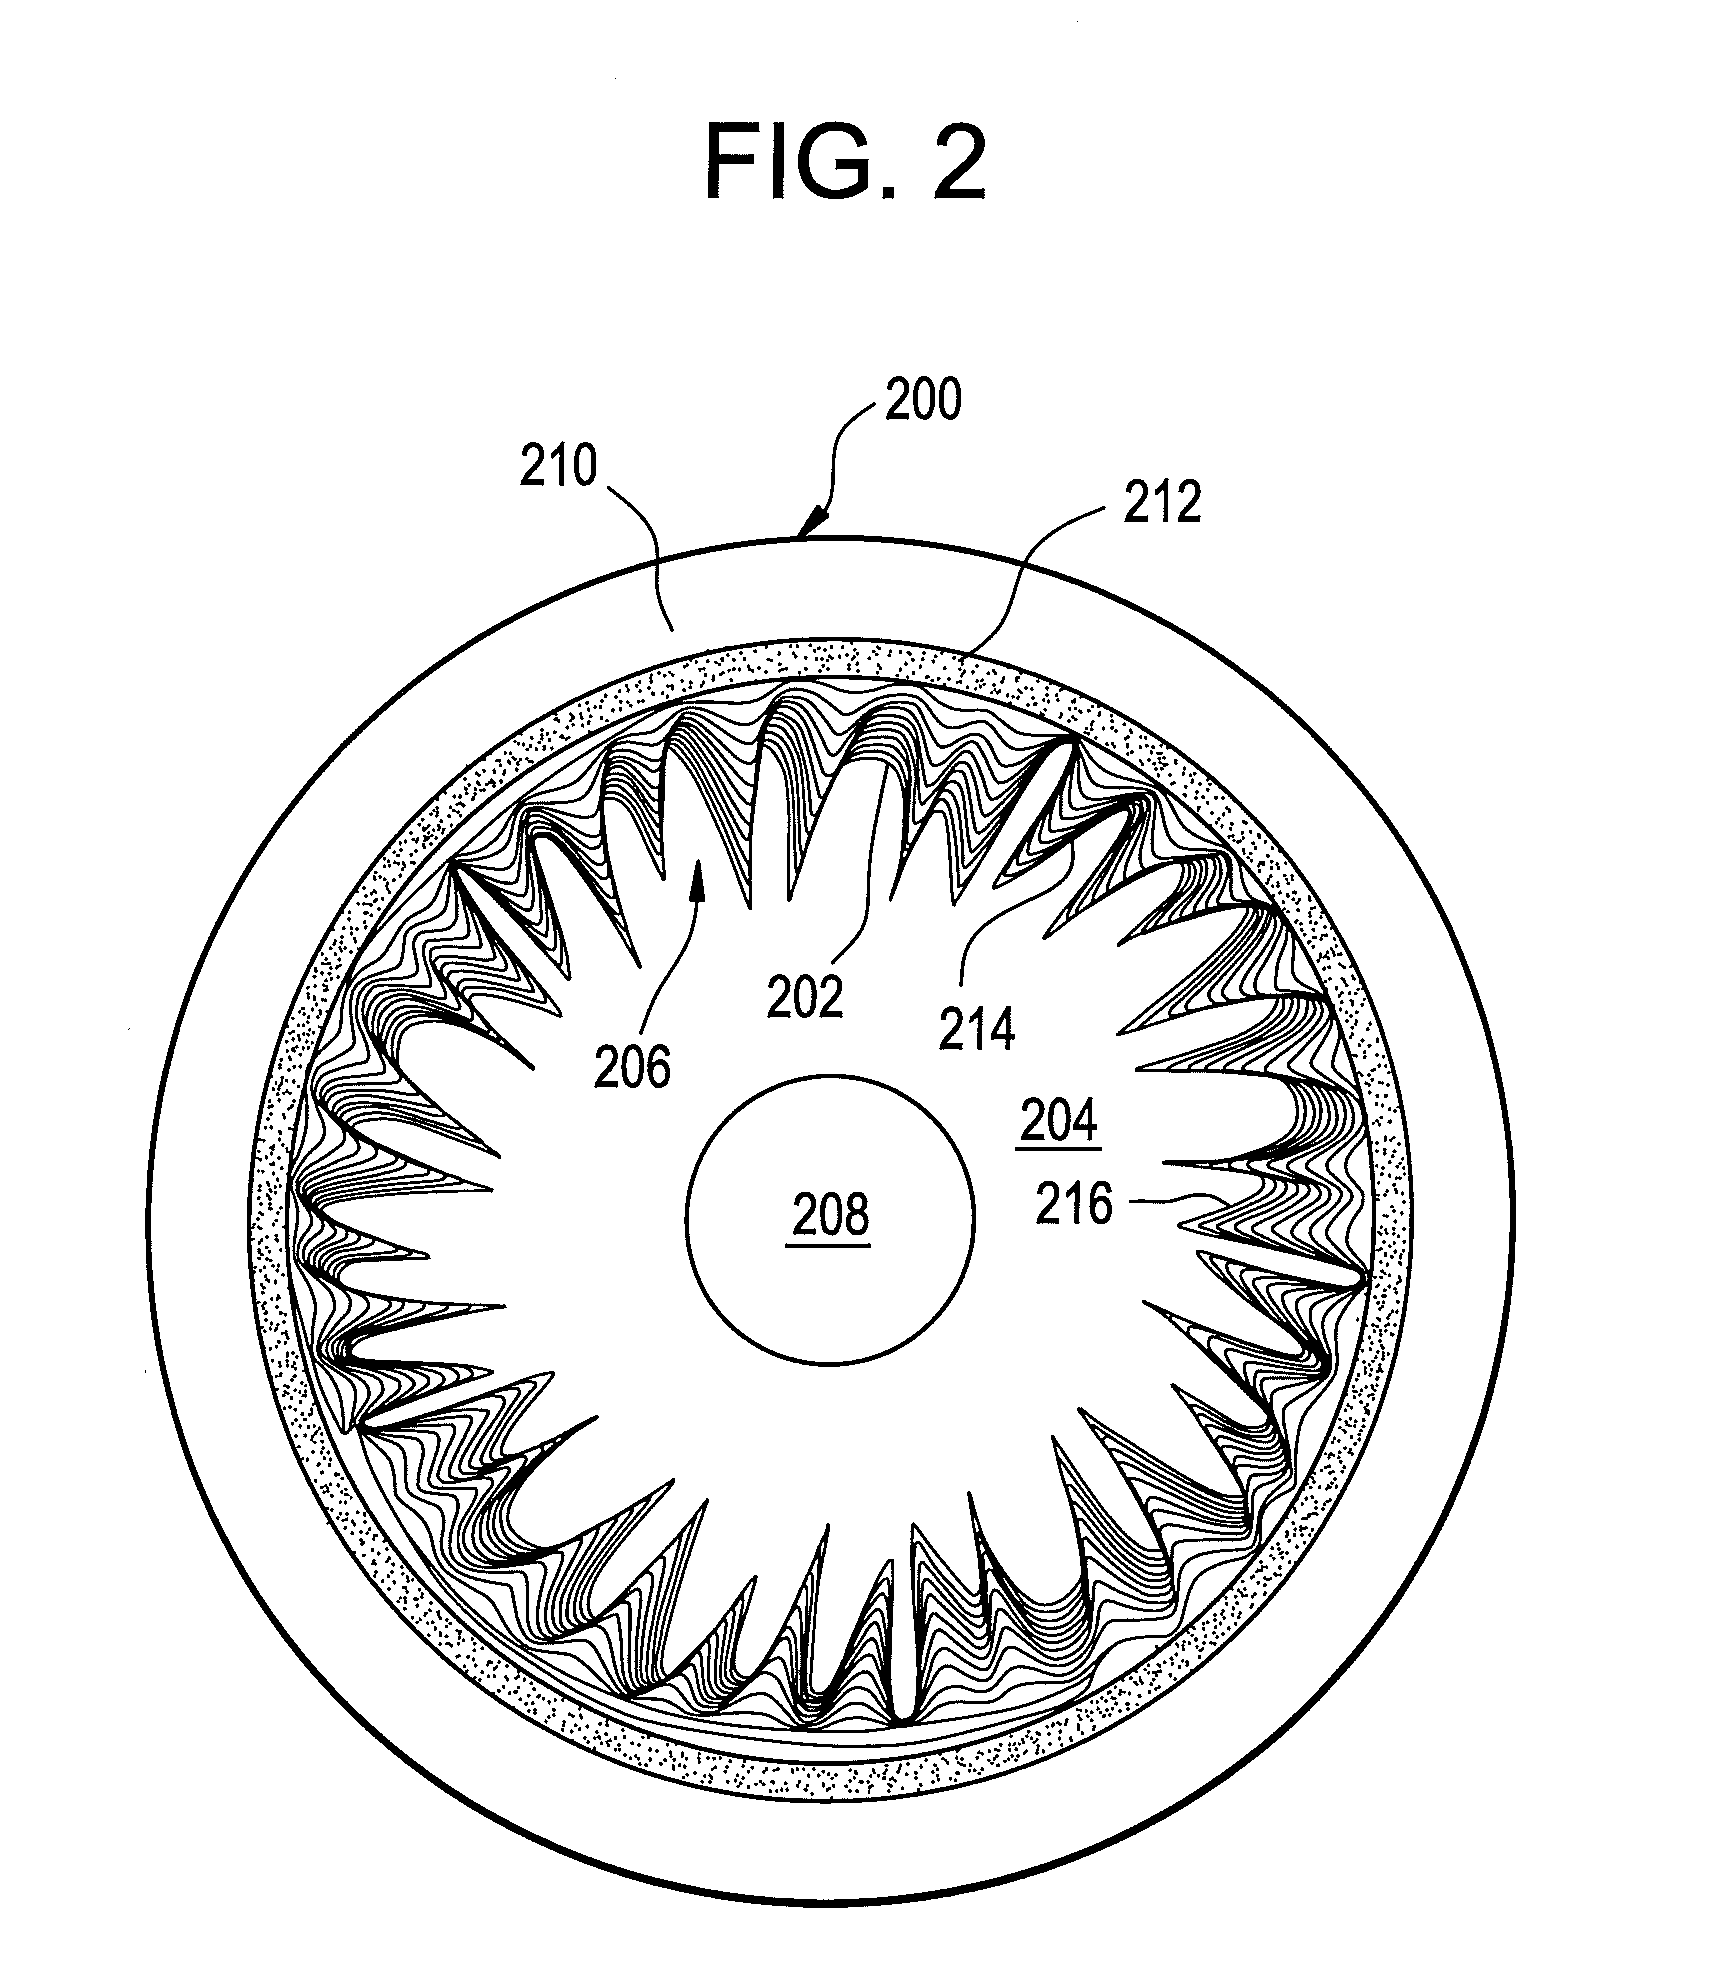 Ophthalmic lens with repeating wave patterns